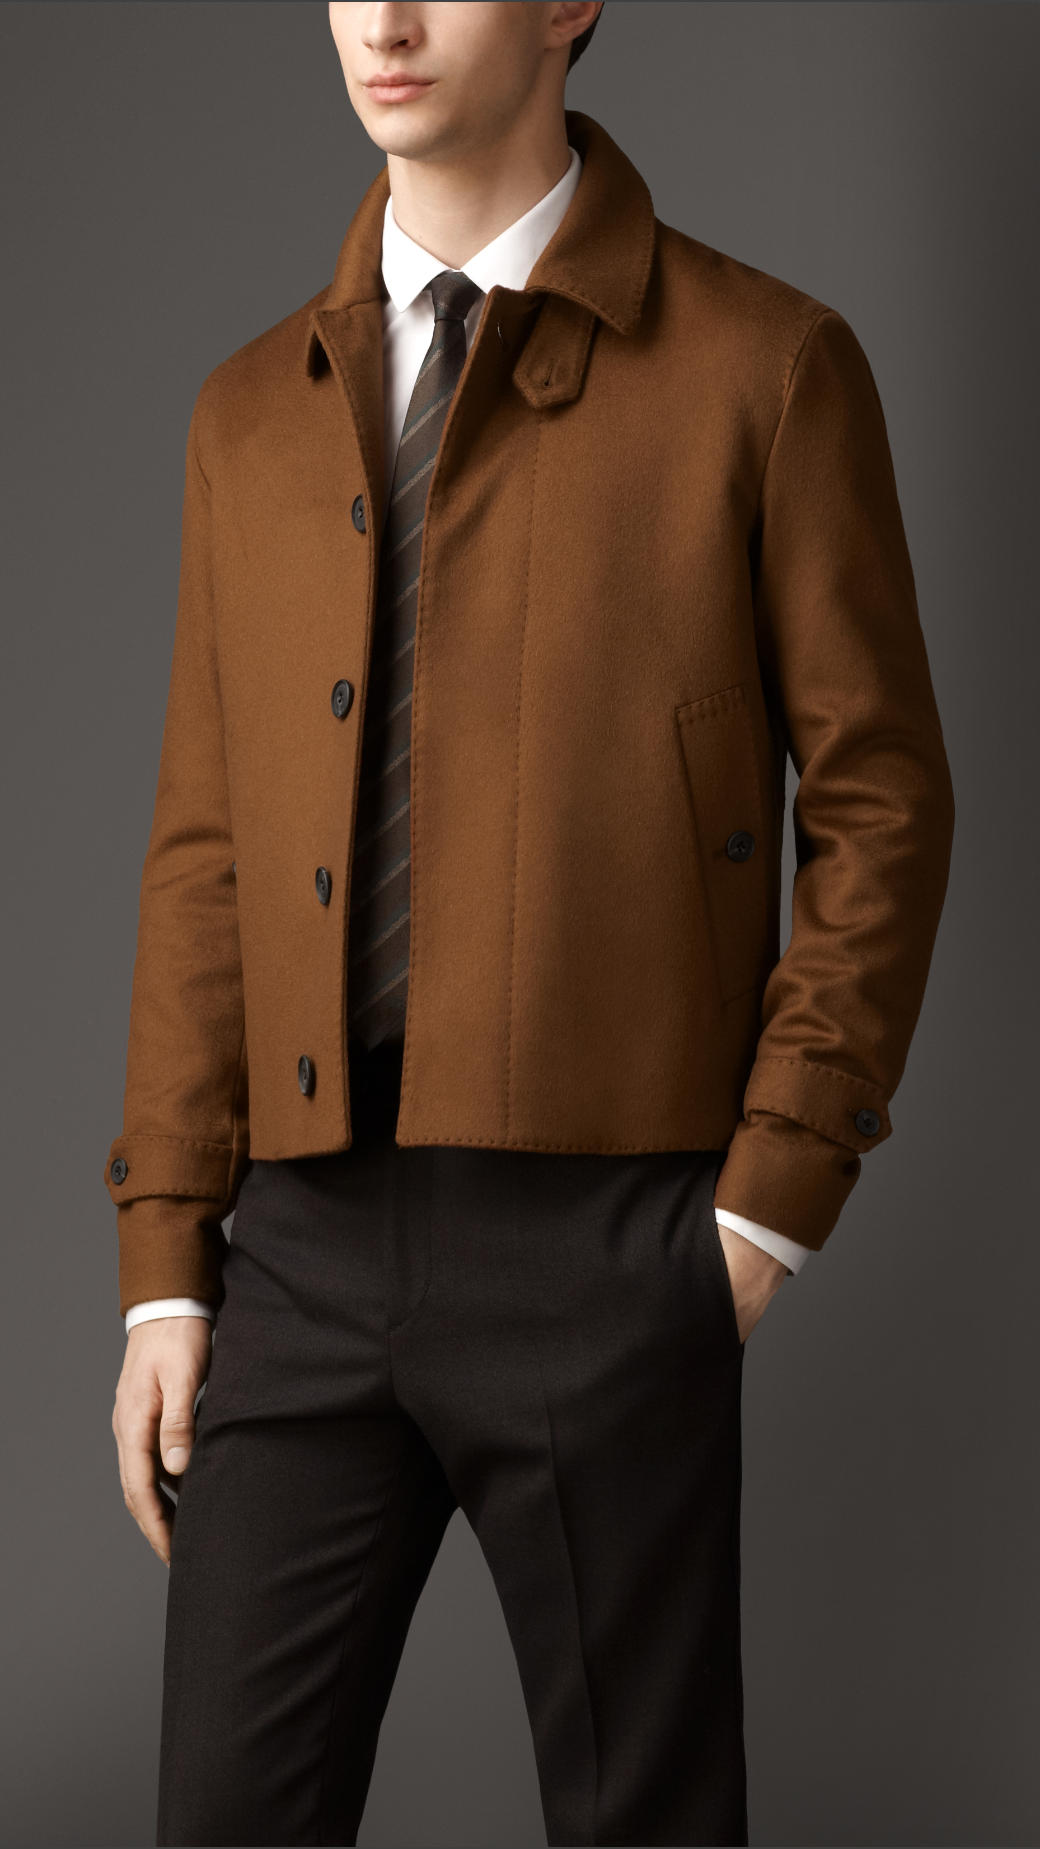 Download Lyst - Burberry Cashmere Harrington Jacket in Brown for Men